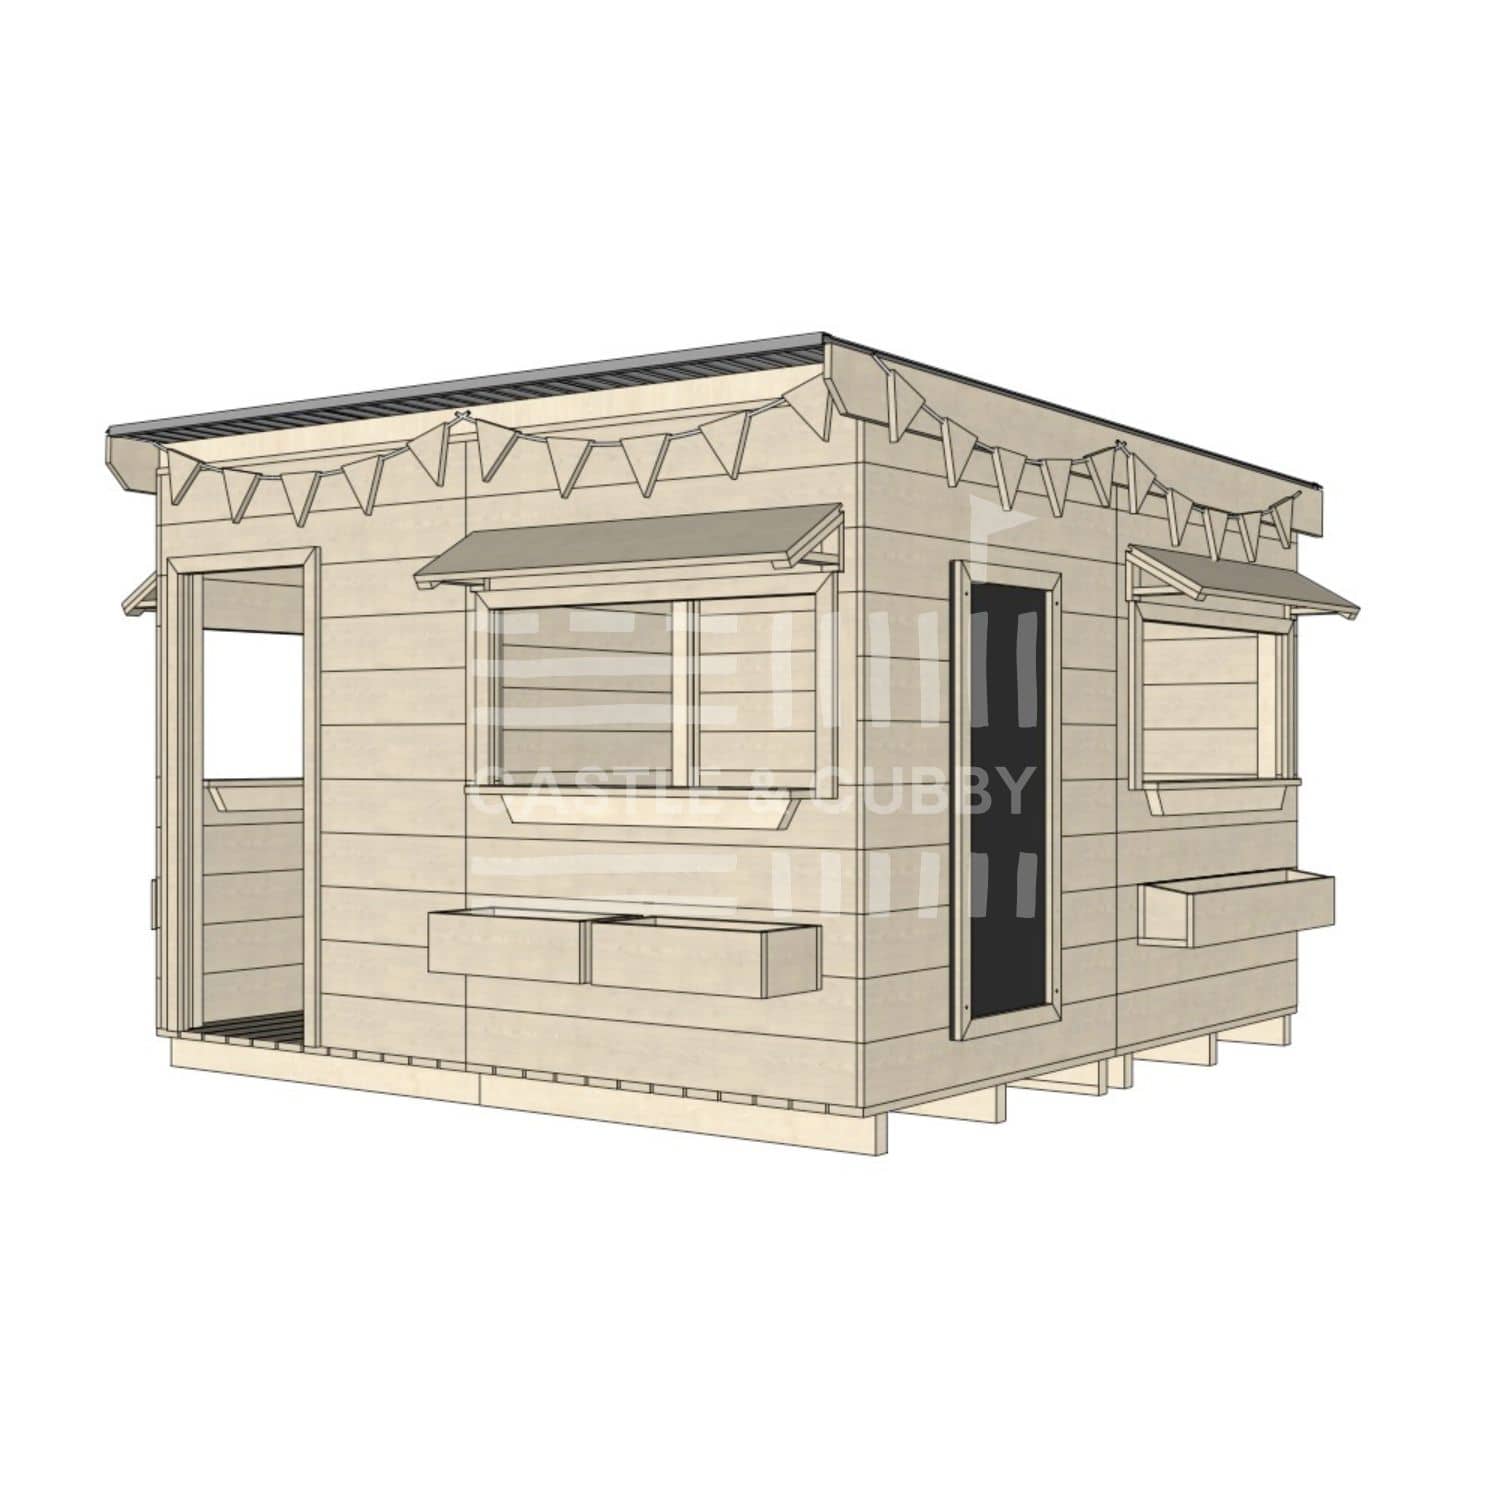 Flat roof raw wooden cubby house commercial education large square accessories